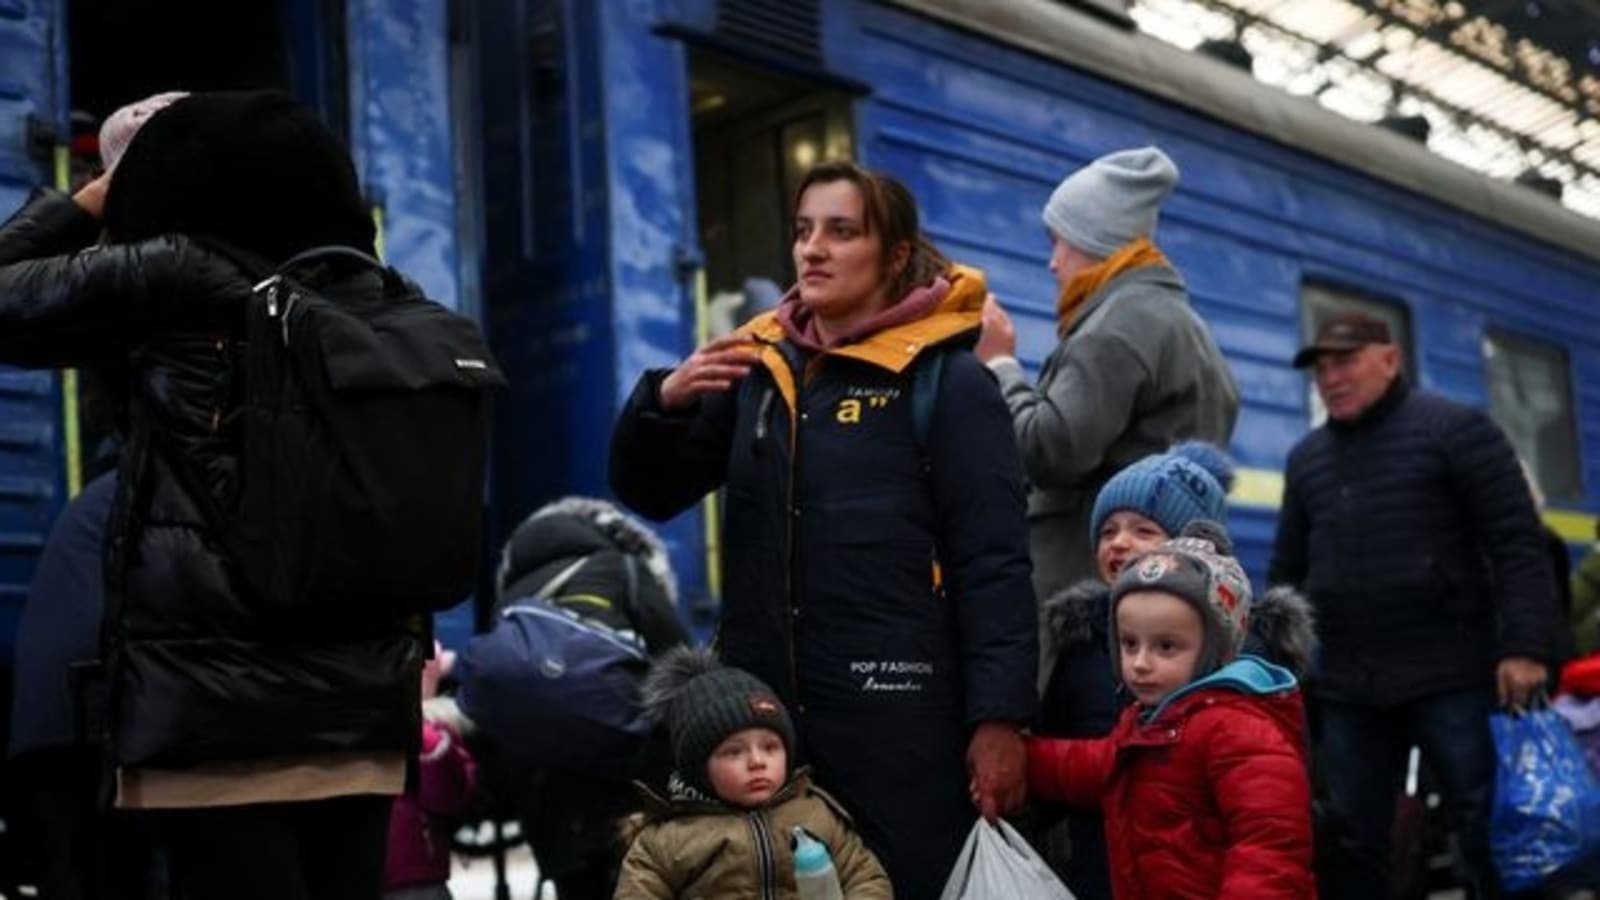 Morning brief: 1 million people fled Ukraine since Russian invasion, says UN and all the latest news